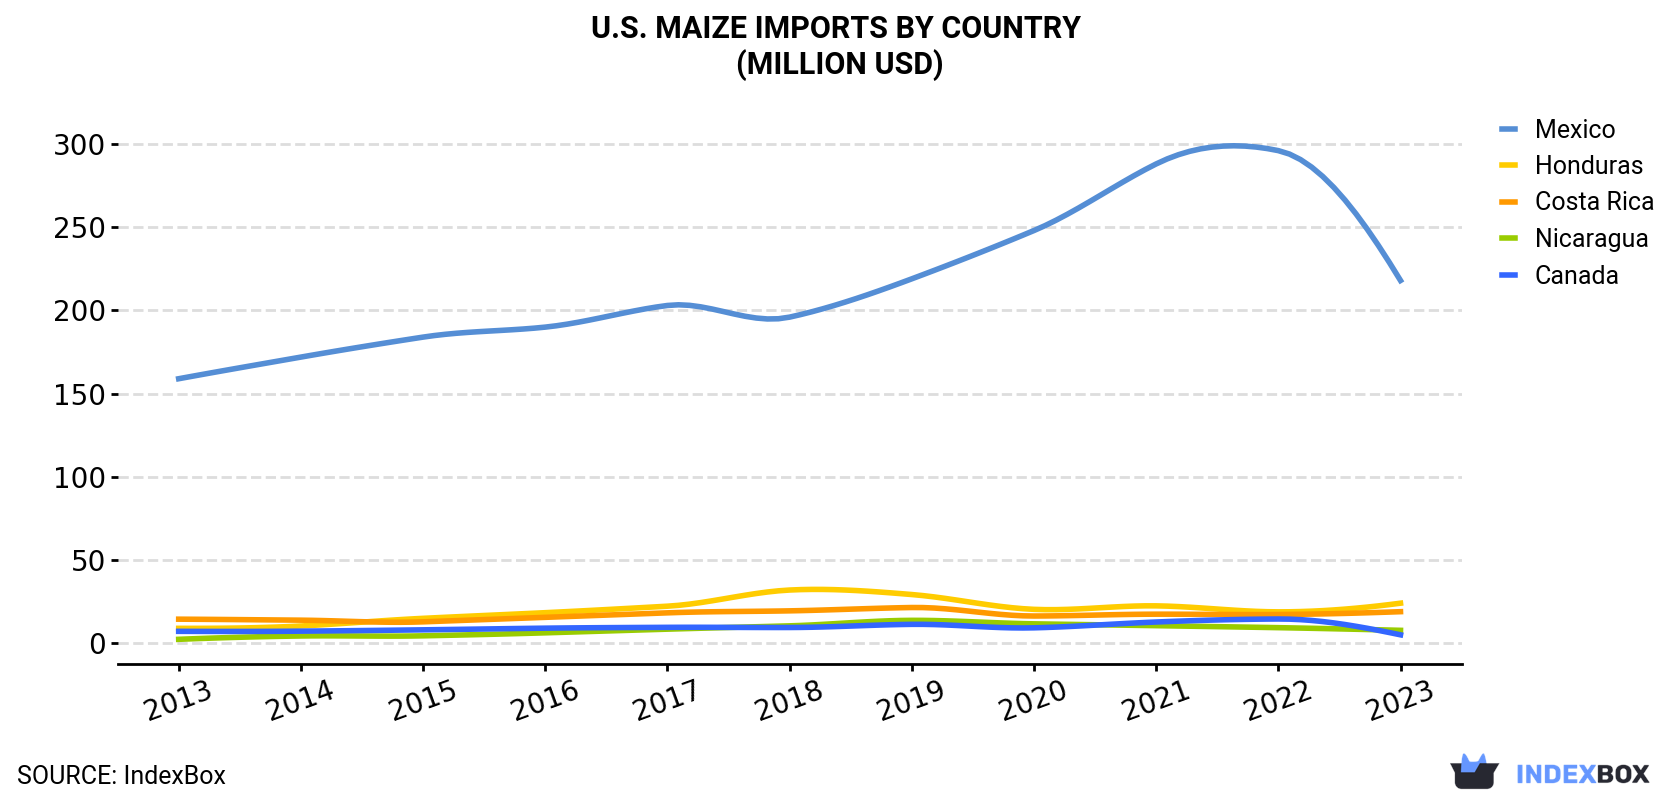 U.S. Maize Imports By Country (Million USD)